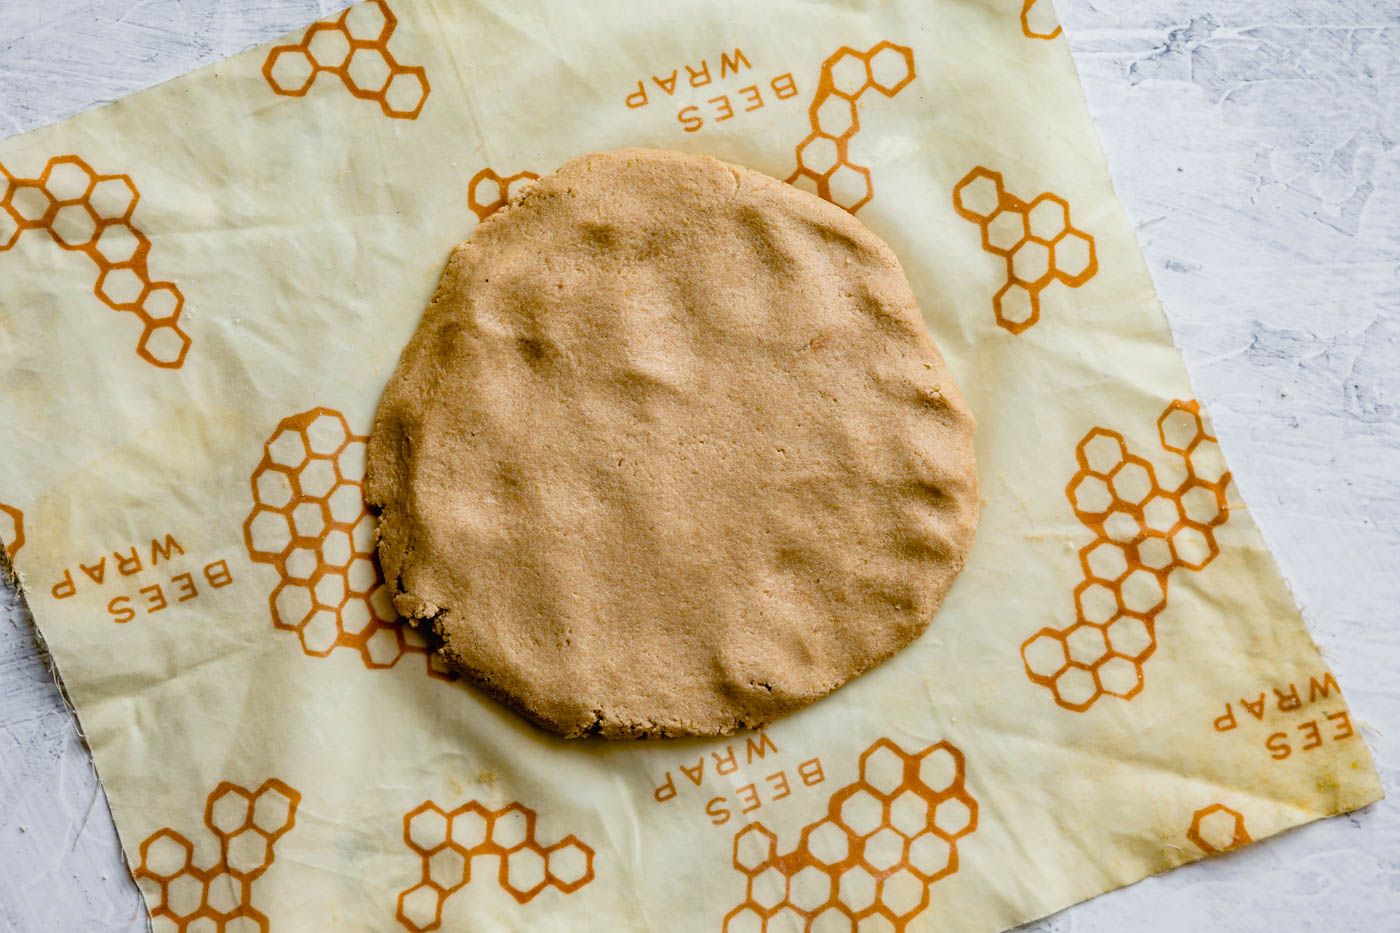 the finished dough has been shaped into a disk on a piece of beewax wrap